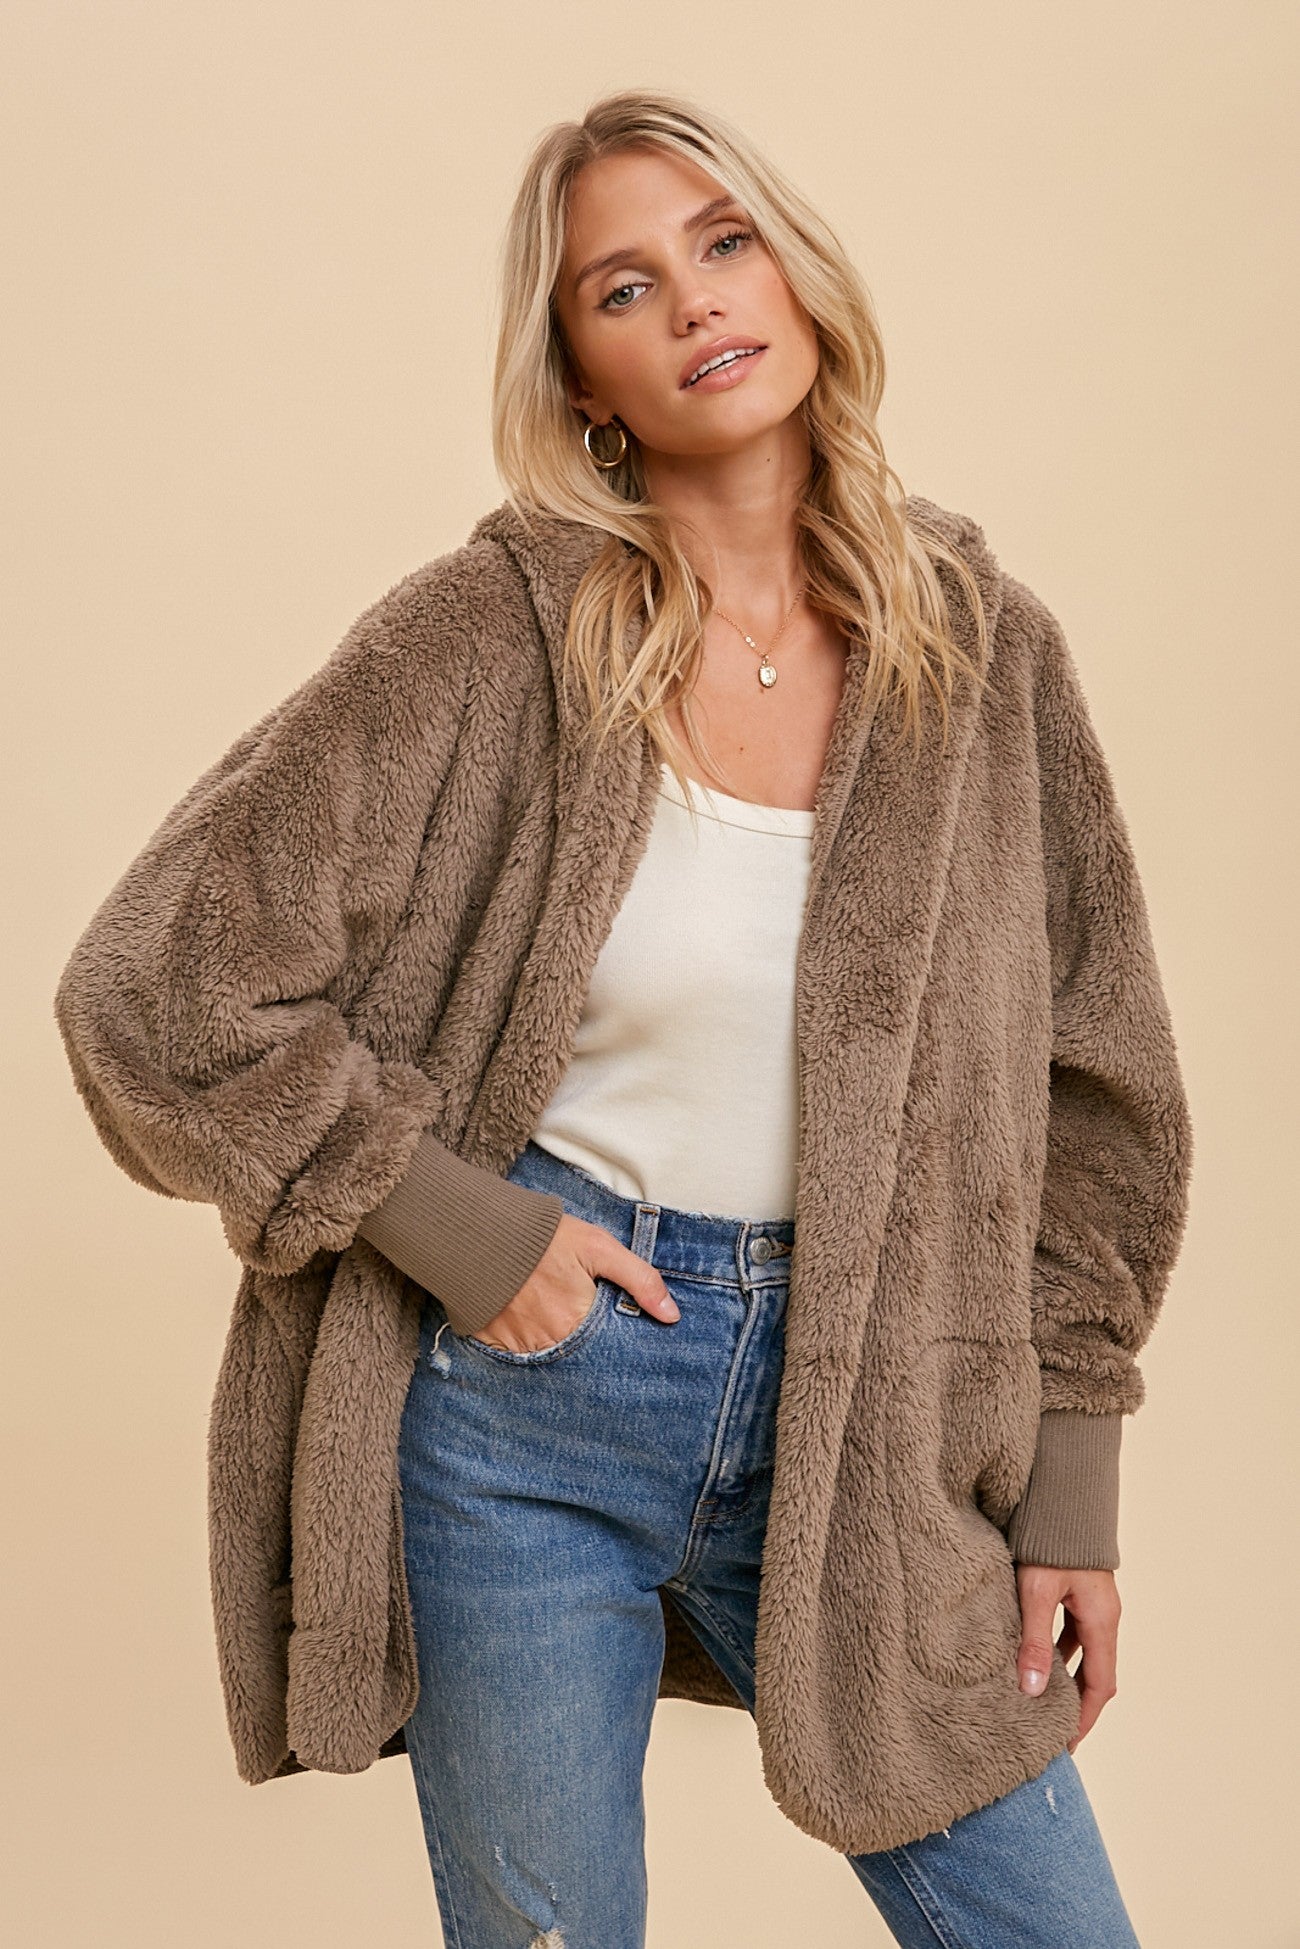 Cozy Time Jacket In 3 Colors